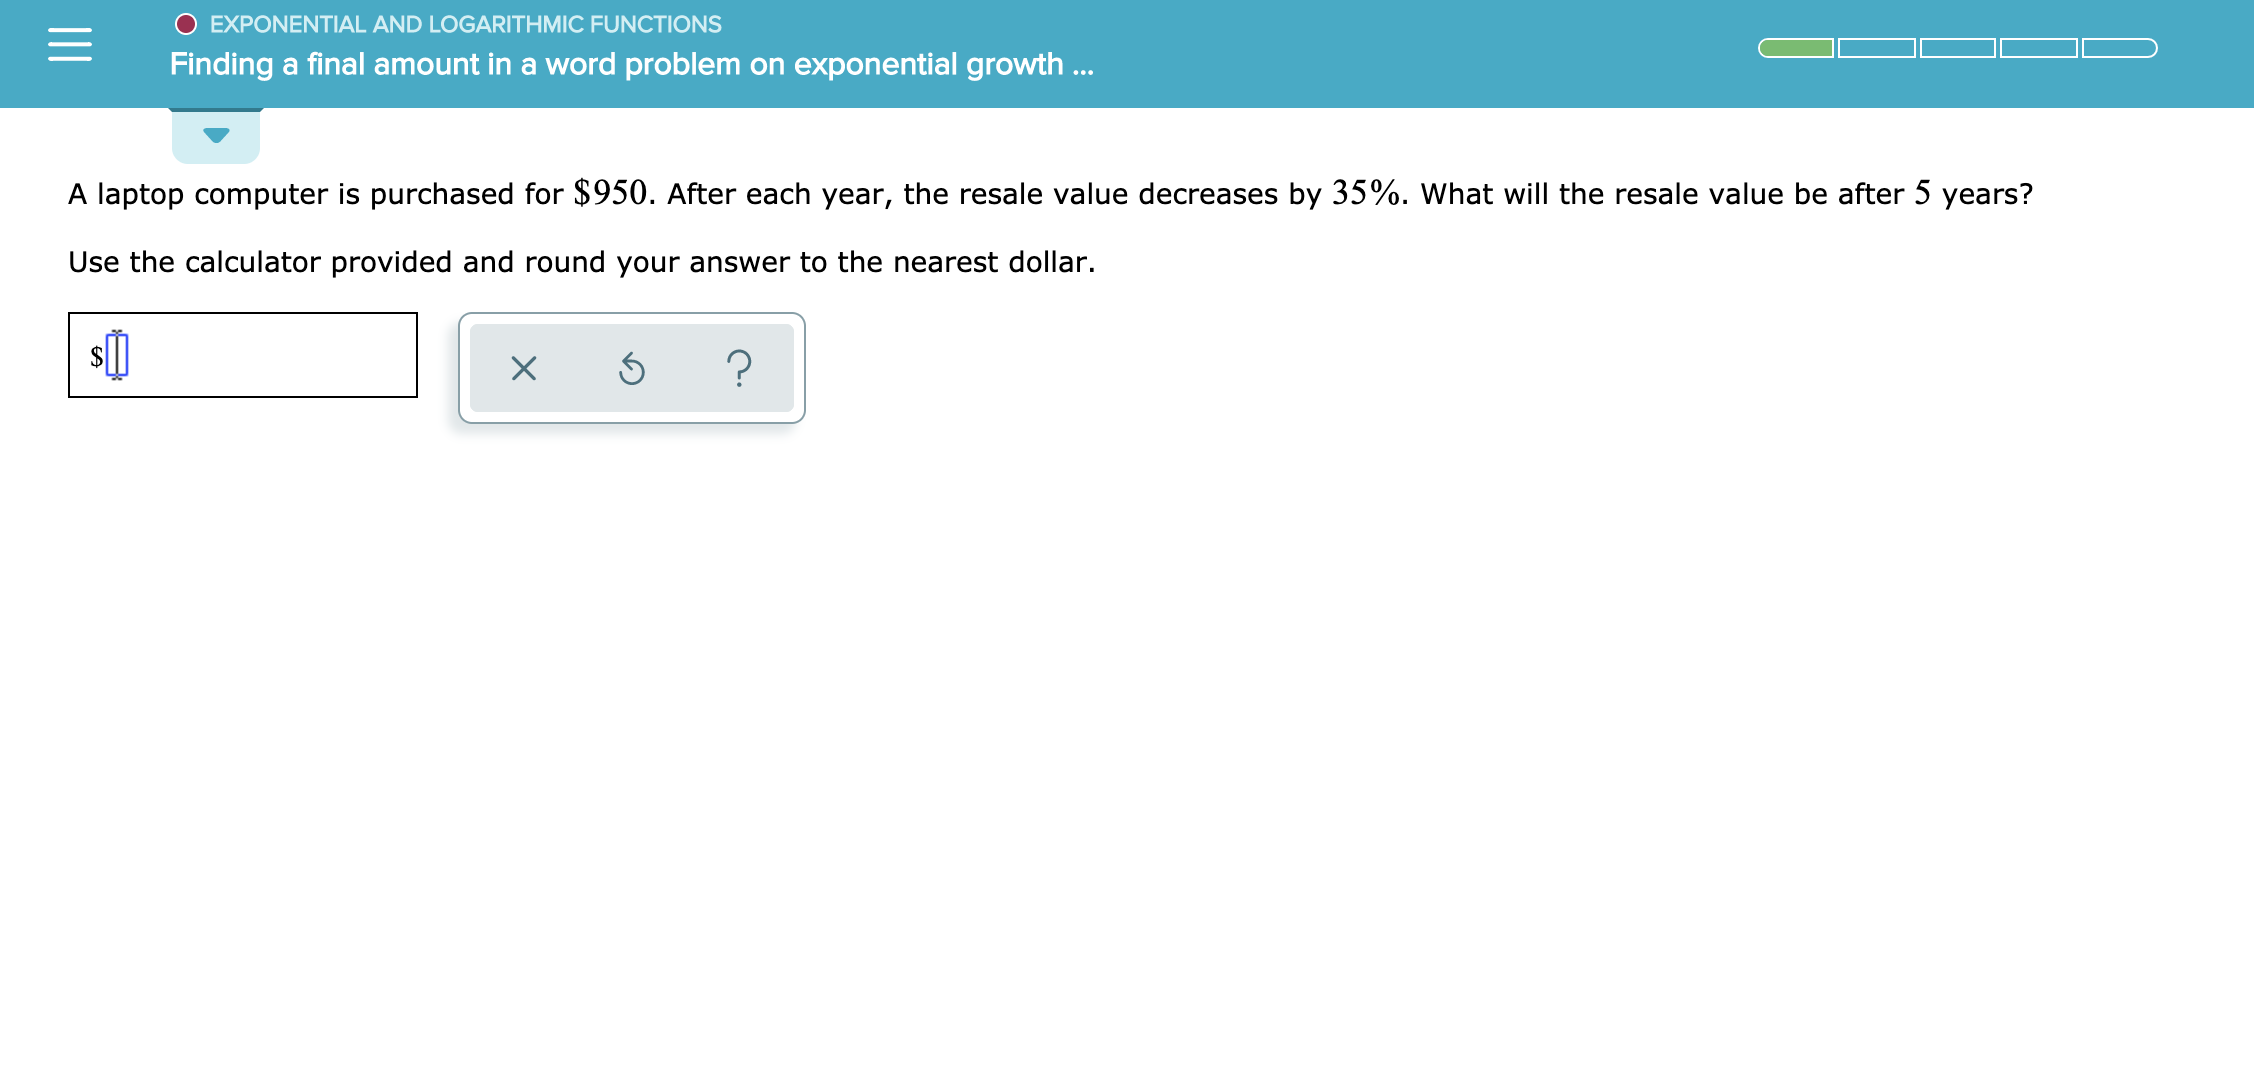 EXPONENTIAL AND LOGARITH MIC FUNCTIONS
Finding a final amount in a word problem on exponential growth ..
A laptop computer is purchased for $950. After each year, the resale value decreases by 35%. What will the resale value be after 5 years?
Use the calculator provided and round your answer to the nearest dollar.
?
X
